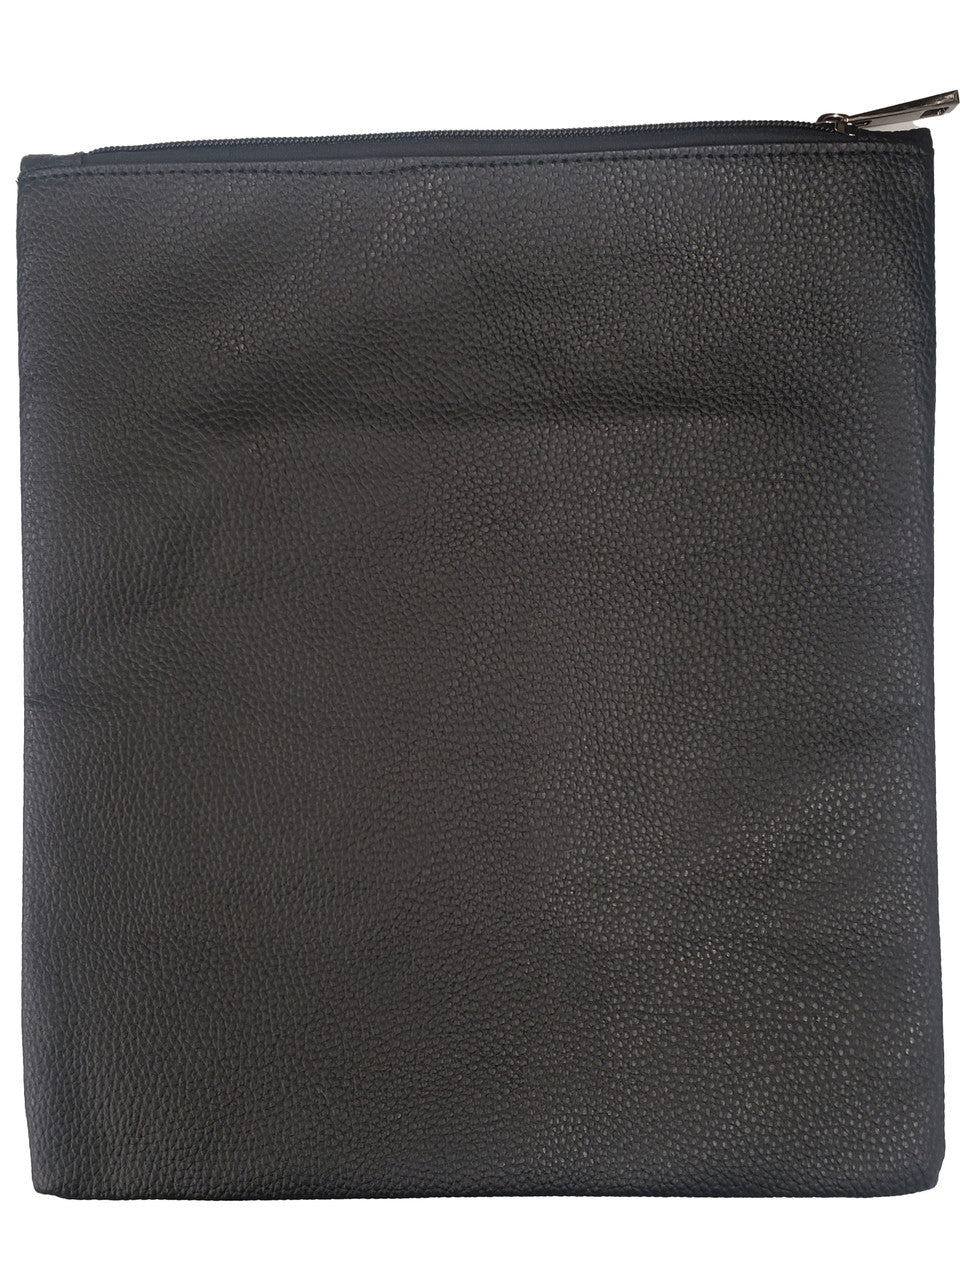 Plastic Protector Black Leather Look Back for Talis and Tefilin Bags